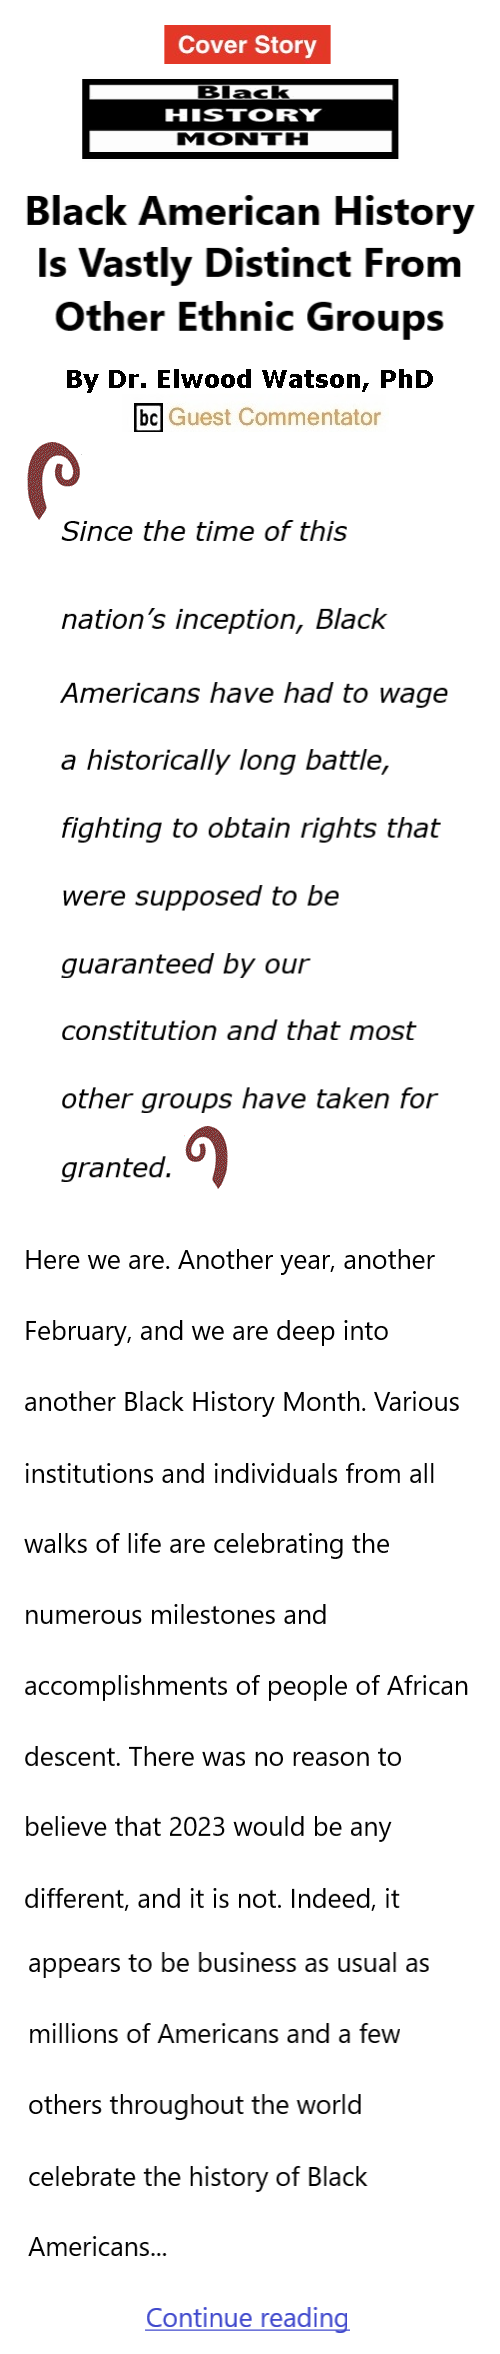 BlackCommentator.com Feb 24, 2023 - Issue 944: Cover Story - Black History Month - Black American History Is Vastly Distinct From Other Ethnic Groups By Dr. Elwood Watson, PhD, BC Guest Commentator